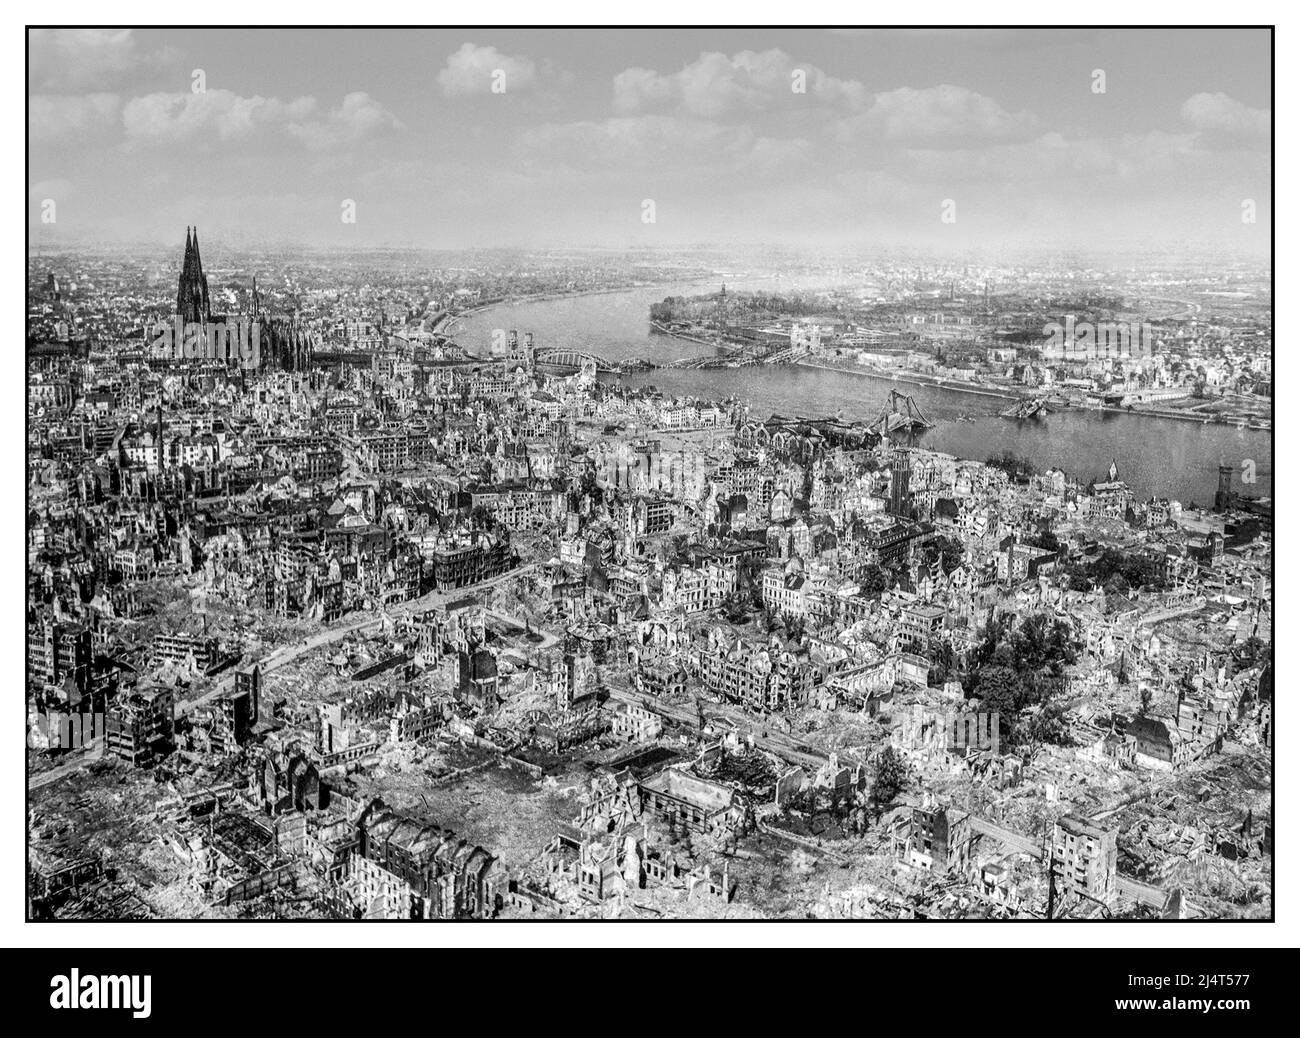 WW2 Allied Bomb damage Cologne Nazi Germany The Kölner Dom (Cologne Cathedral) stands seemingly undamaged (although having been directly hit several times and damaged severely) while entire area surrounding it is completely devastated. The Hauptbahnhof (Köln Central Station) and Hohenzollern Bridge over The River Rhine lie damaged to the north and east of the cathedral. The 30/31 May 1942 attack on Cologne was the first 1,000 bomber raid. Occupied Germany, 24 April 1945. Stock Photo